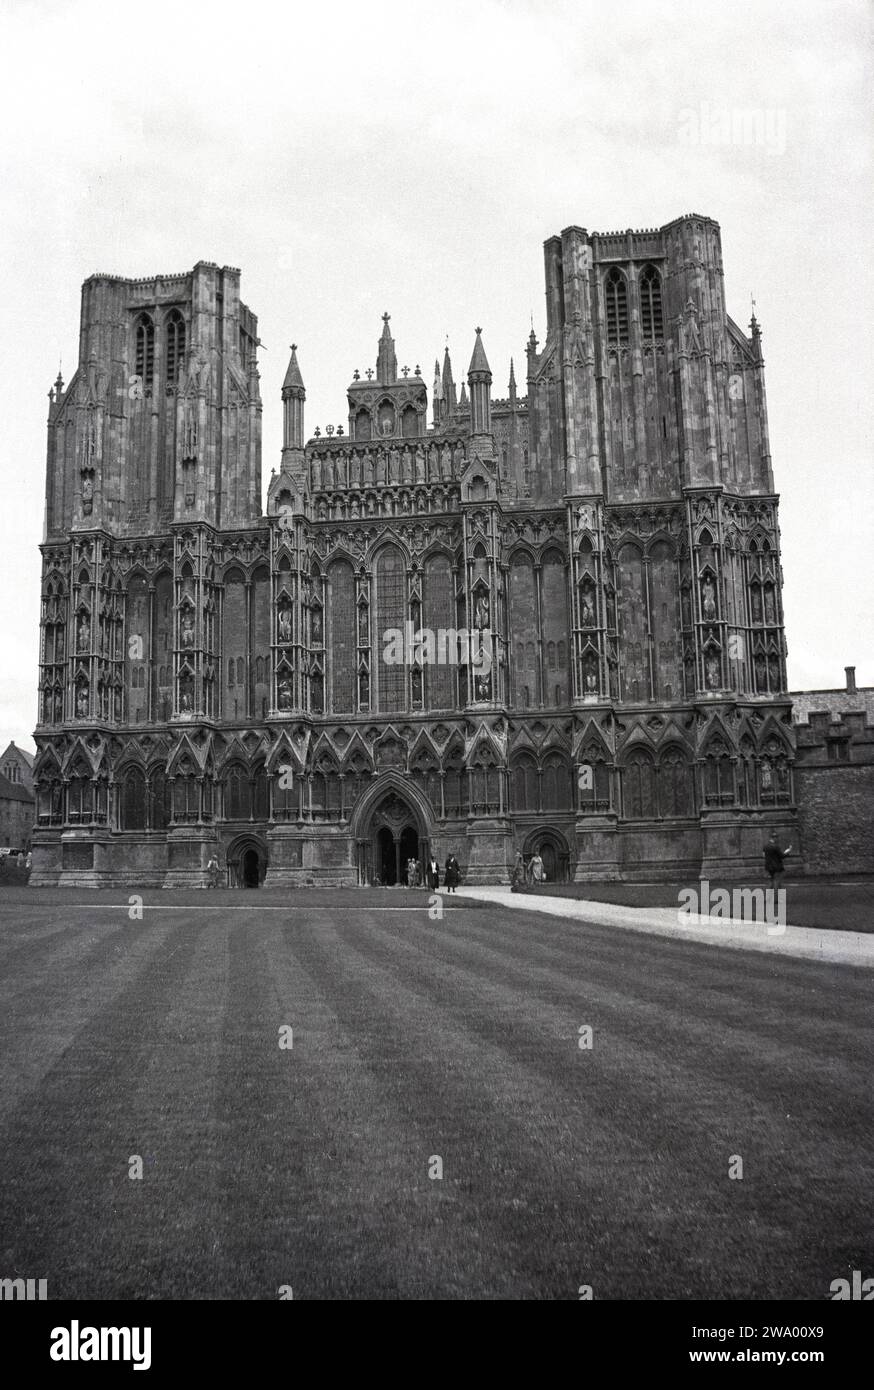 1950s, historical, exterior of Wells Cathedral, Somerset, England, UK. Built in the English gothic architecture style, it was orginally a Roman Catholic cathedral, but became an Anglican cathedral when Henry VIII instructed the English church to split from Rome. Stock Photo